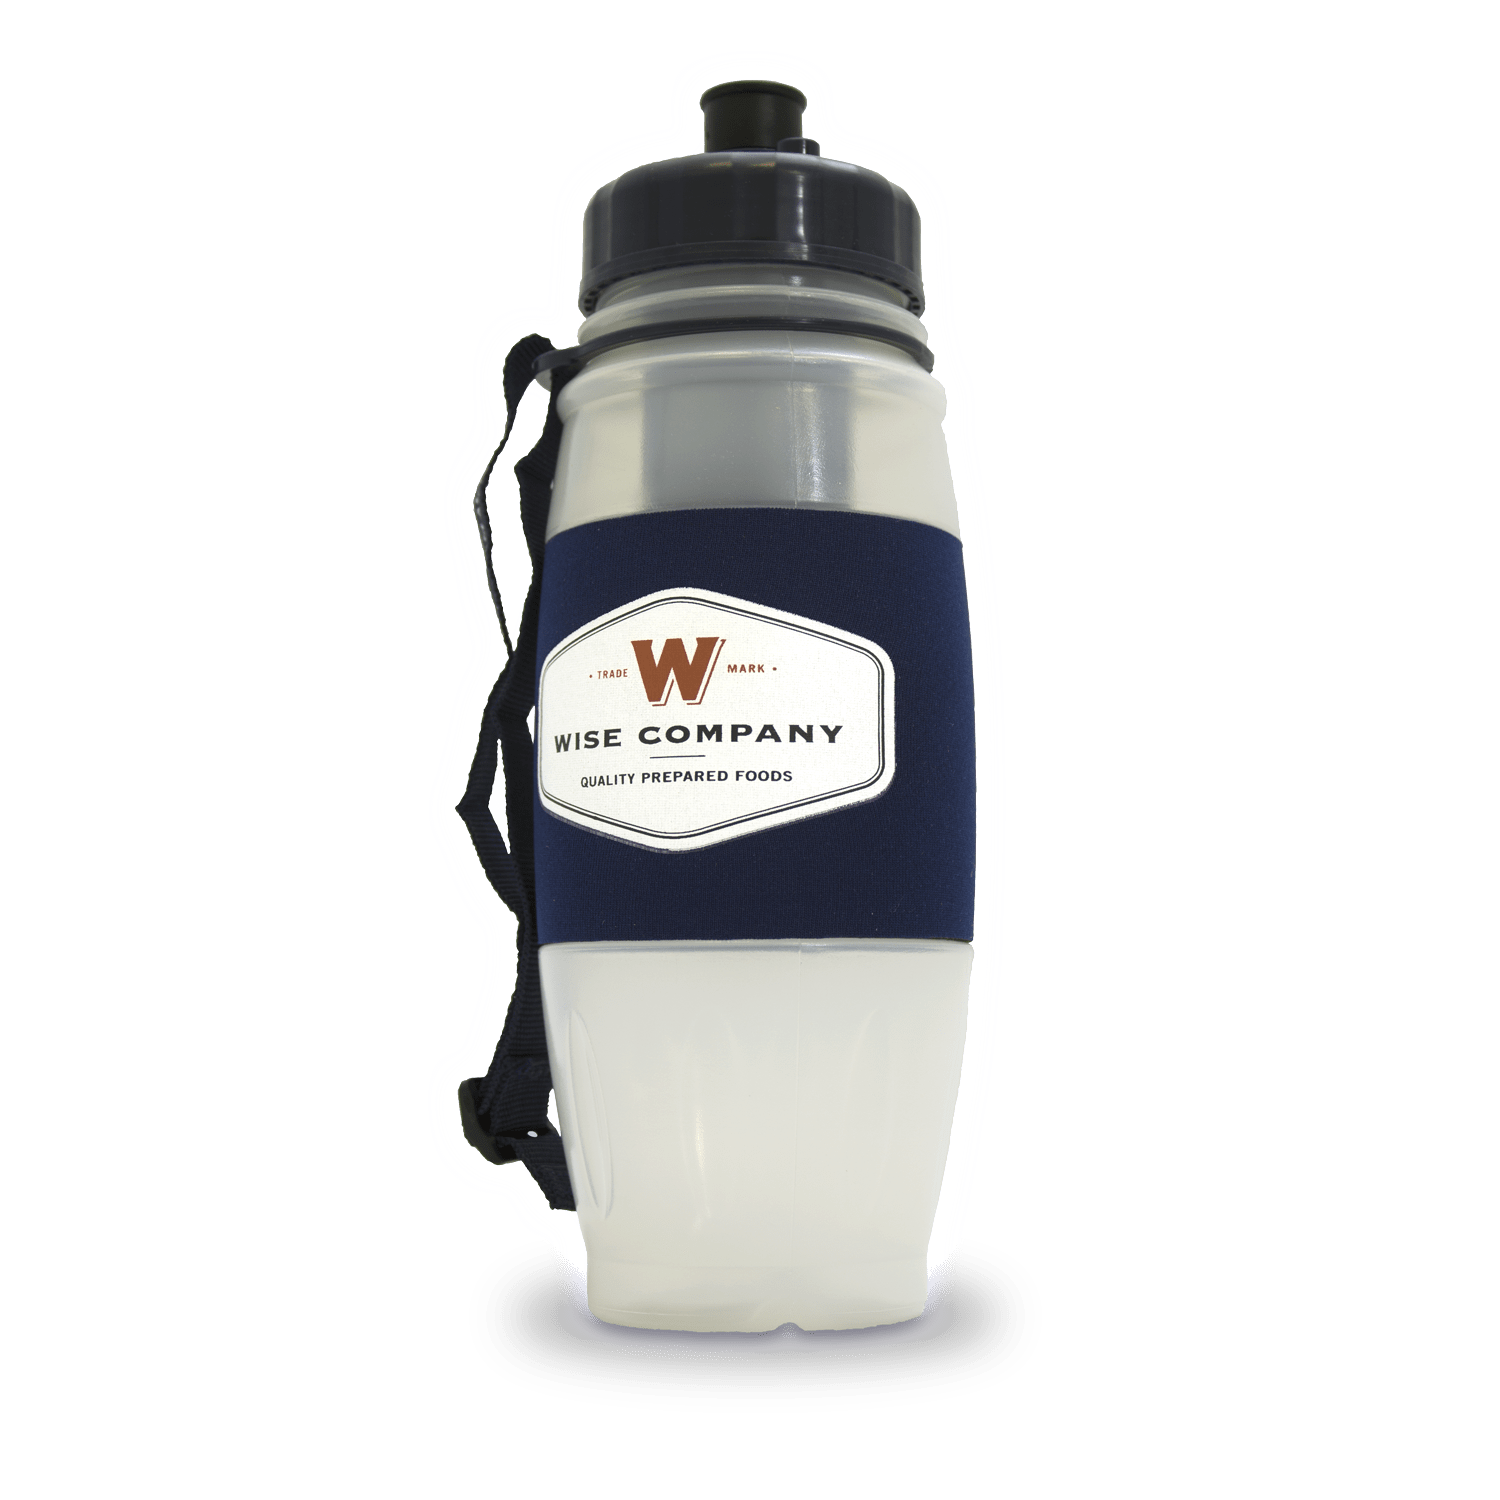 Wise Company Water Filtration Bottle Powered By Seychelle